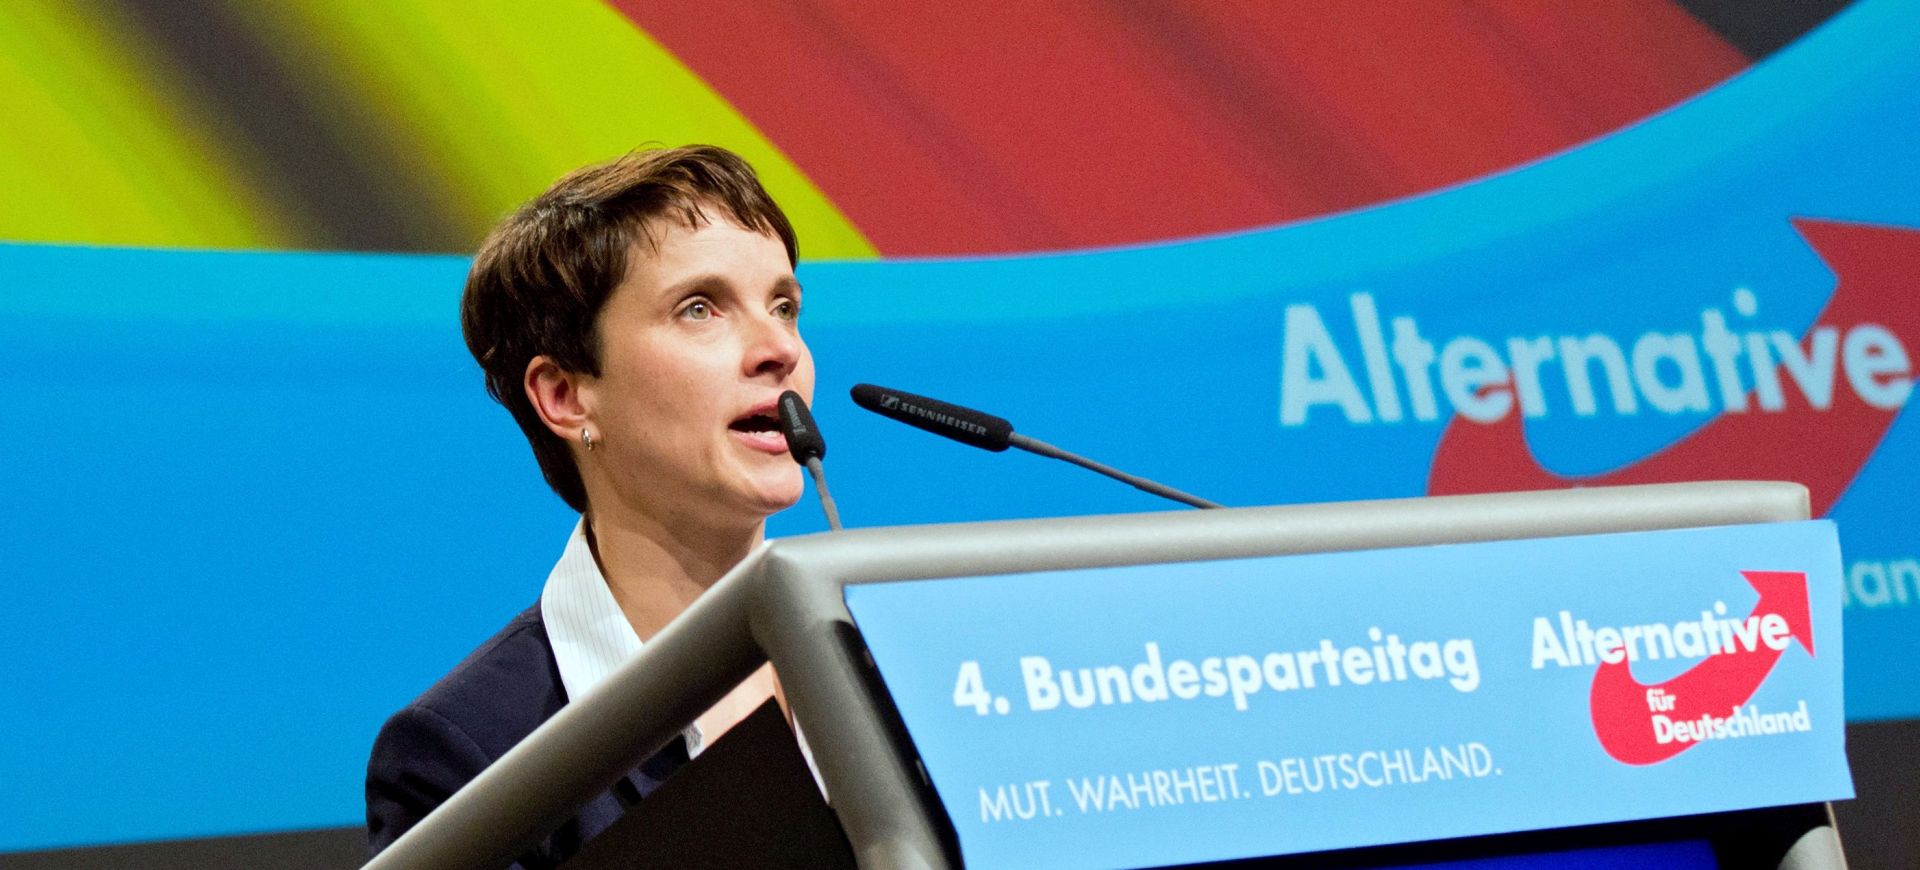 epa05135907 (FILE) A file picture dated 29 november 2015 shows Frauke Petry, Speaker of the right-wing populist political party Alternative for Germany (AfD, Alternative fuer Deutschland), delivering a speech at the AfD federal convention in Hanover, Germany. The head of the anti-migrant AfD party, Frauke Petry, told local media on 30 January 2016, that border security officials should use their guns to fire at migrants who try to enter the country illegally. 'We need comprehensive controls so that there are no longer so many unregistered migrants entering via Austria,' Petry told the newspaper Mannheimer Morgen. Police officers must prevent illegal immigration, 'making use of their guns as a last resort. Just as the law says.' Petry's comments have attracted criticism from the center-left and pro-migrant parties. Nonetheless, her party's increasingly radical stance on the migrant crisis has proven popular among many voters dismayed by Germany's chaotic handling of the huge influx in arrivals, which saw 1.1 million asylum seekers enter Germany last year.  EPA/JULIAN STRATENSCHULTE